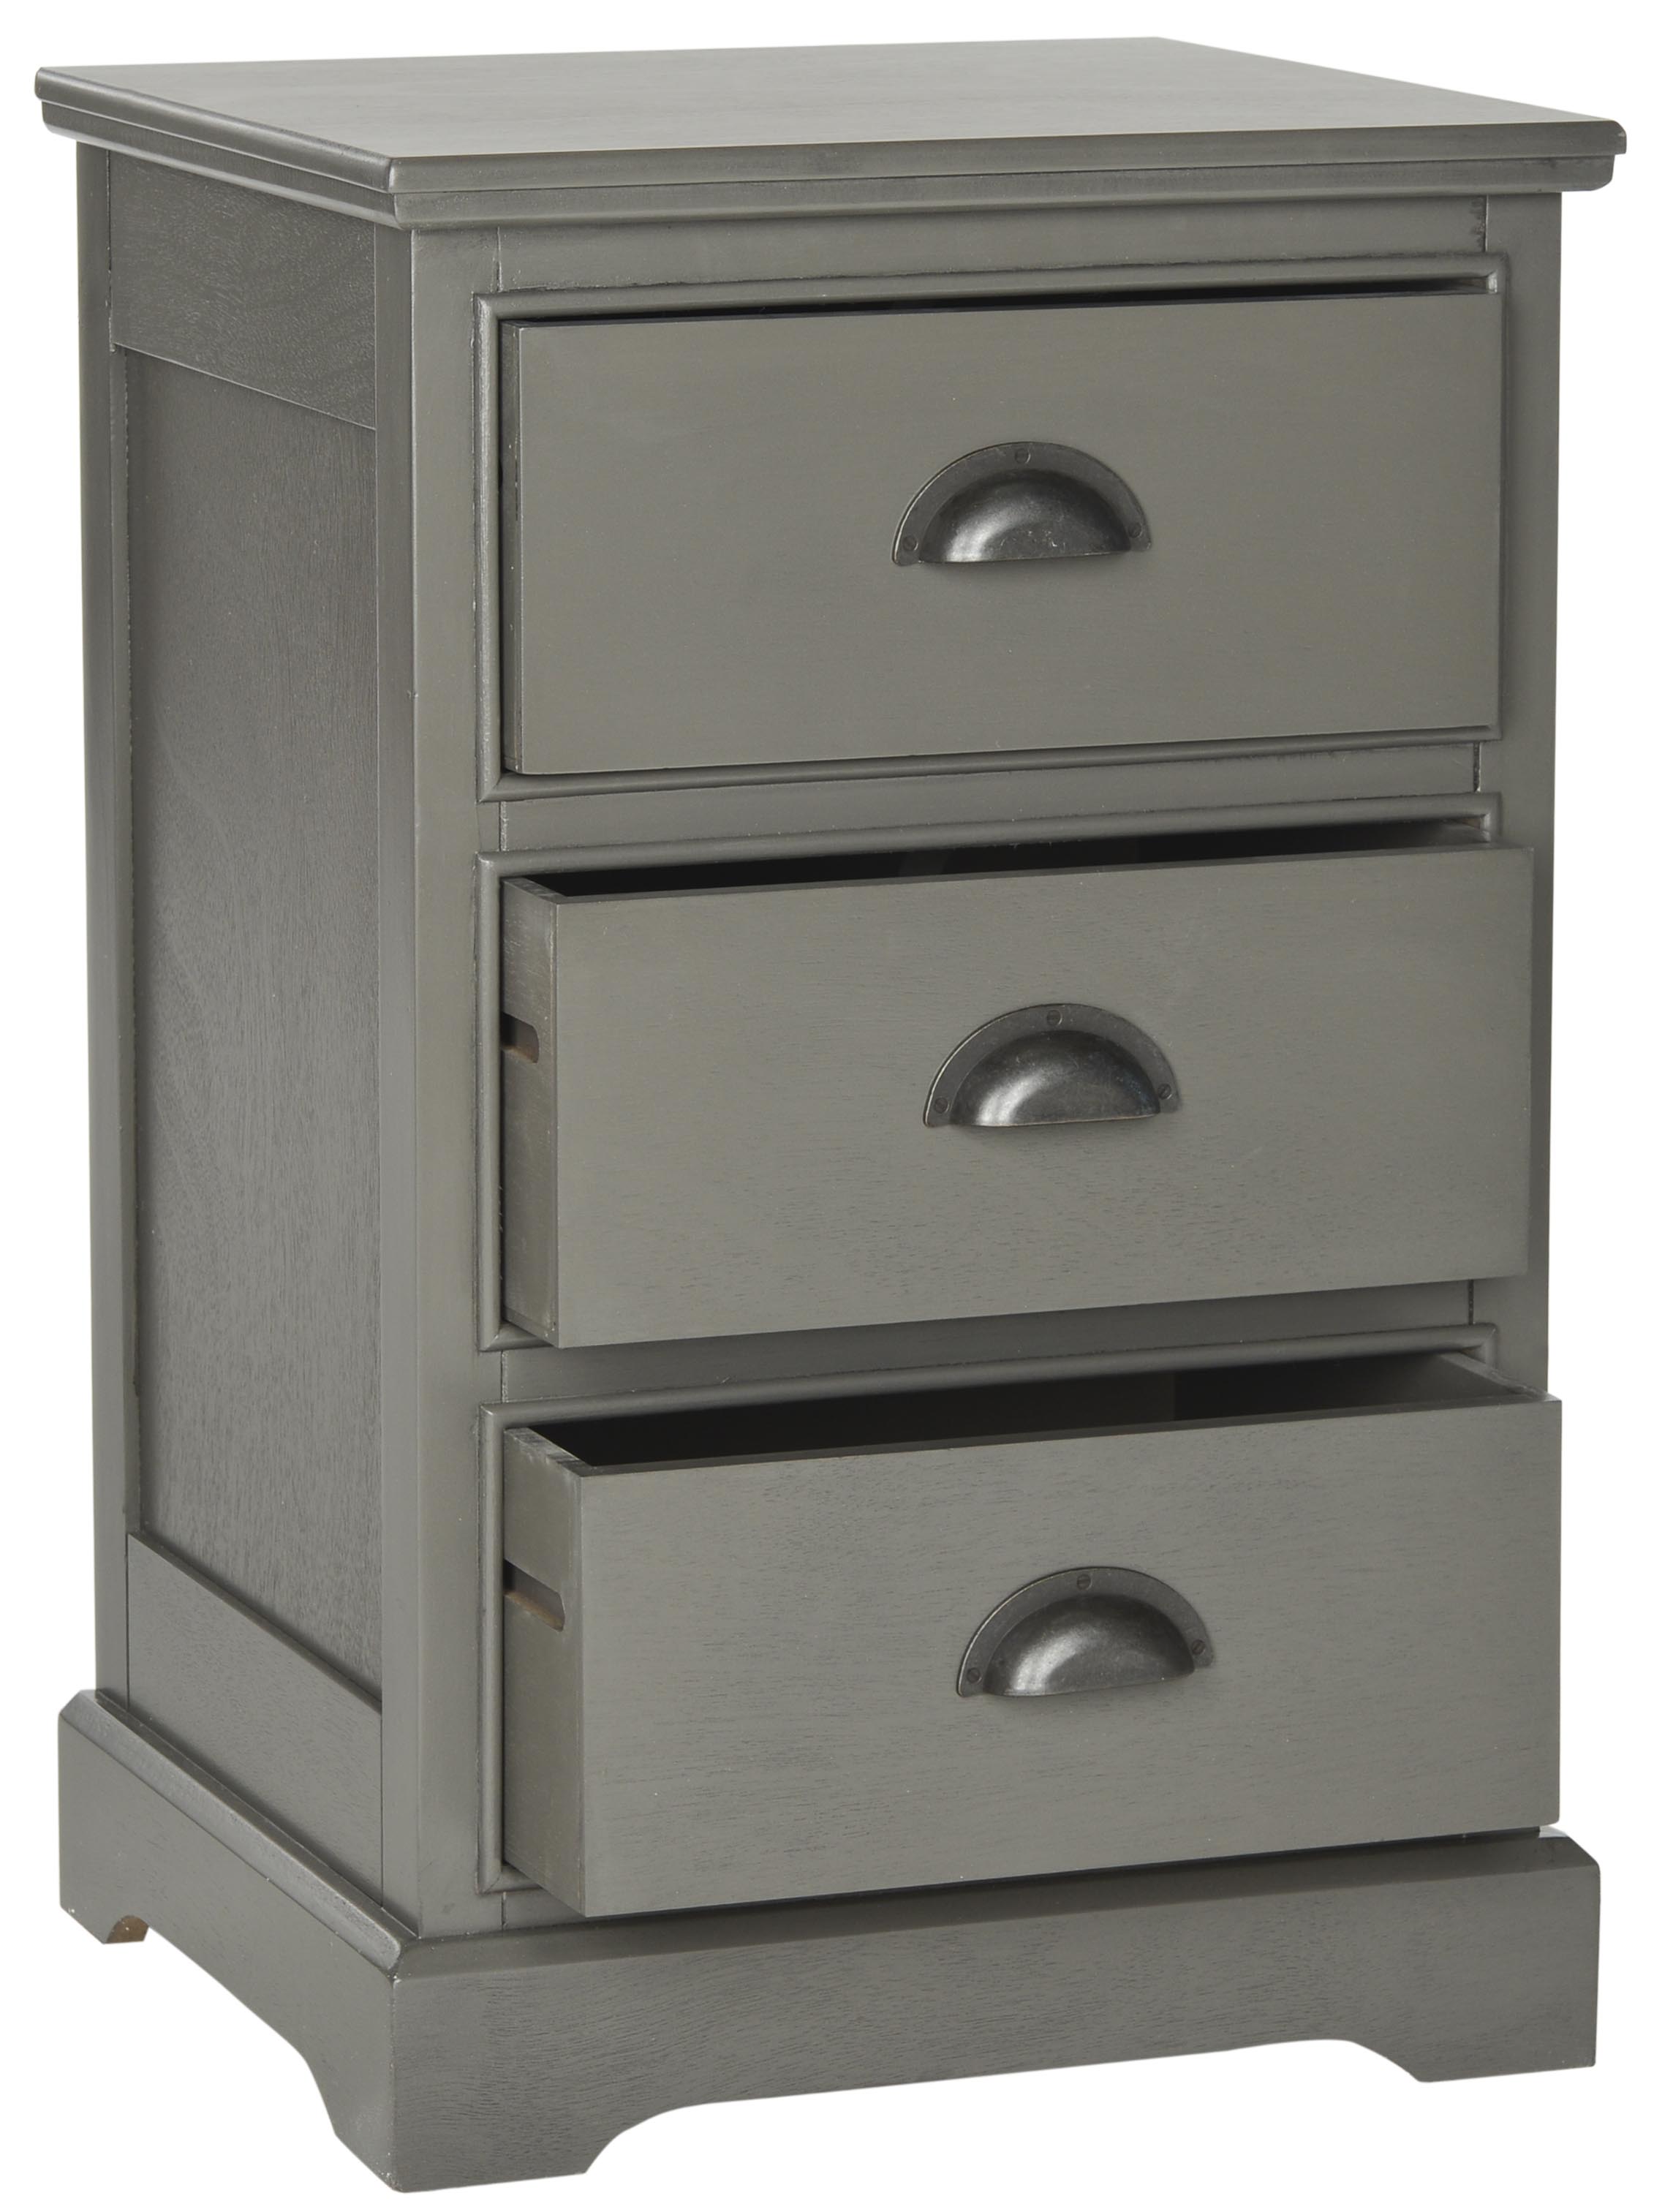 SAFAVIEH Griffin Traditional Rustic 3 Drawer Side Table, Grey - image 2 of 4